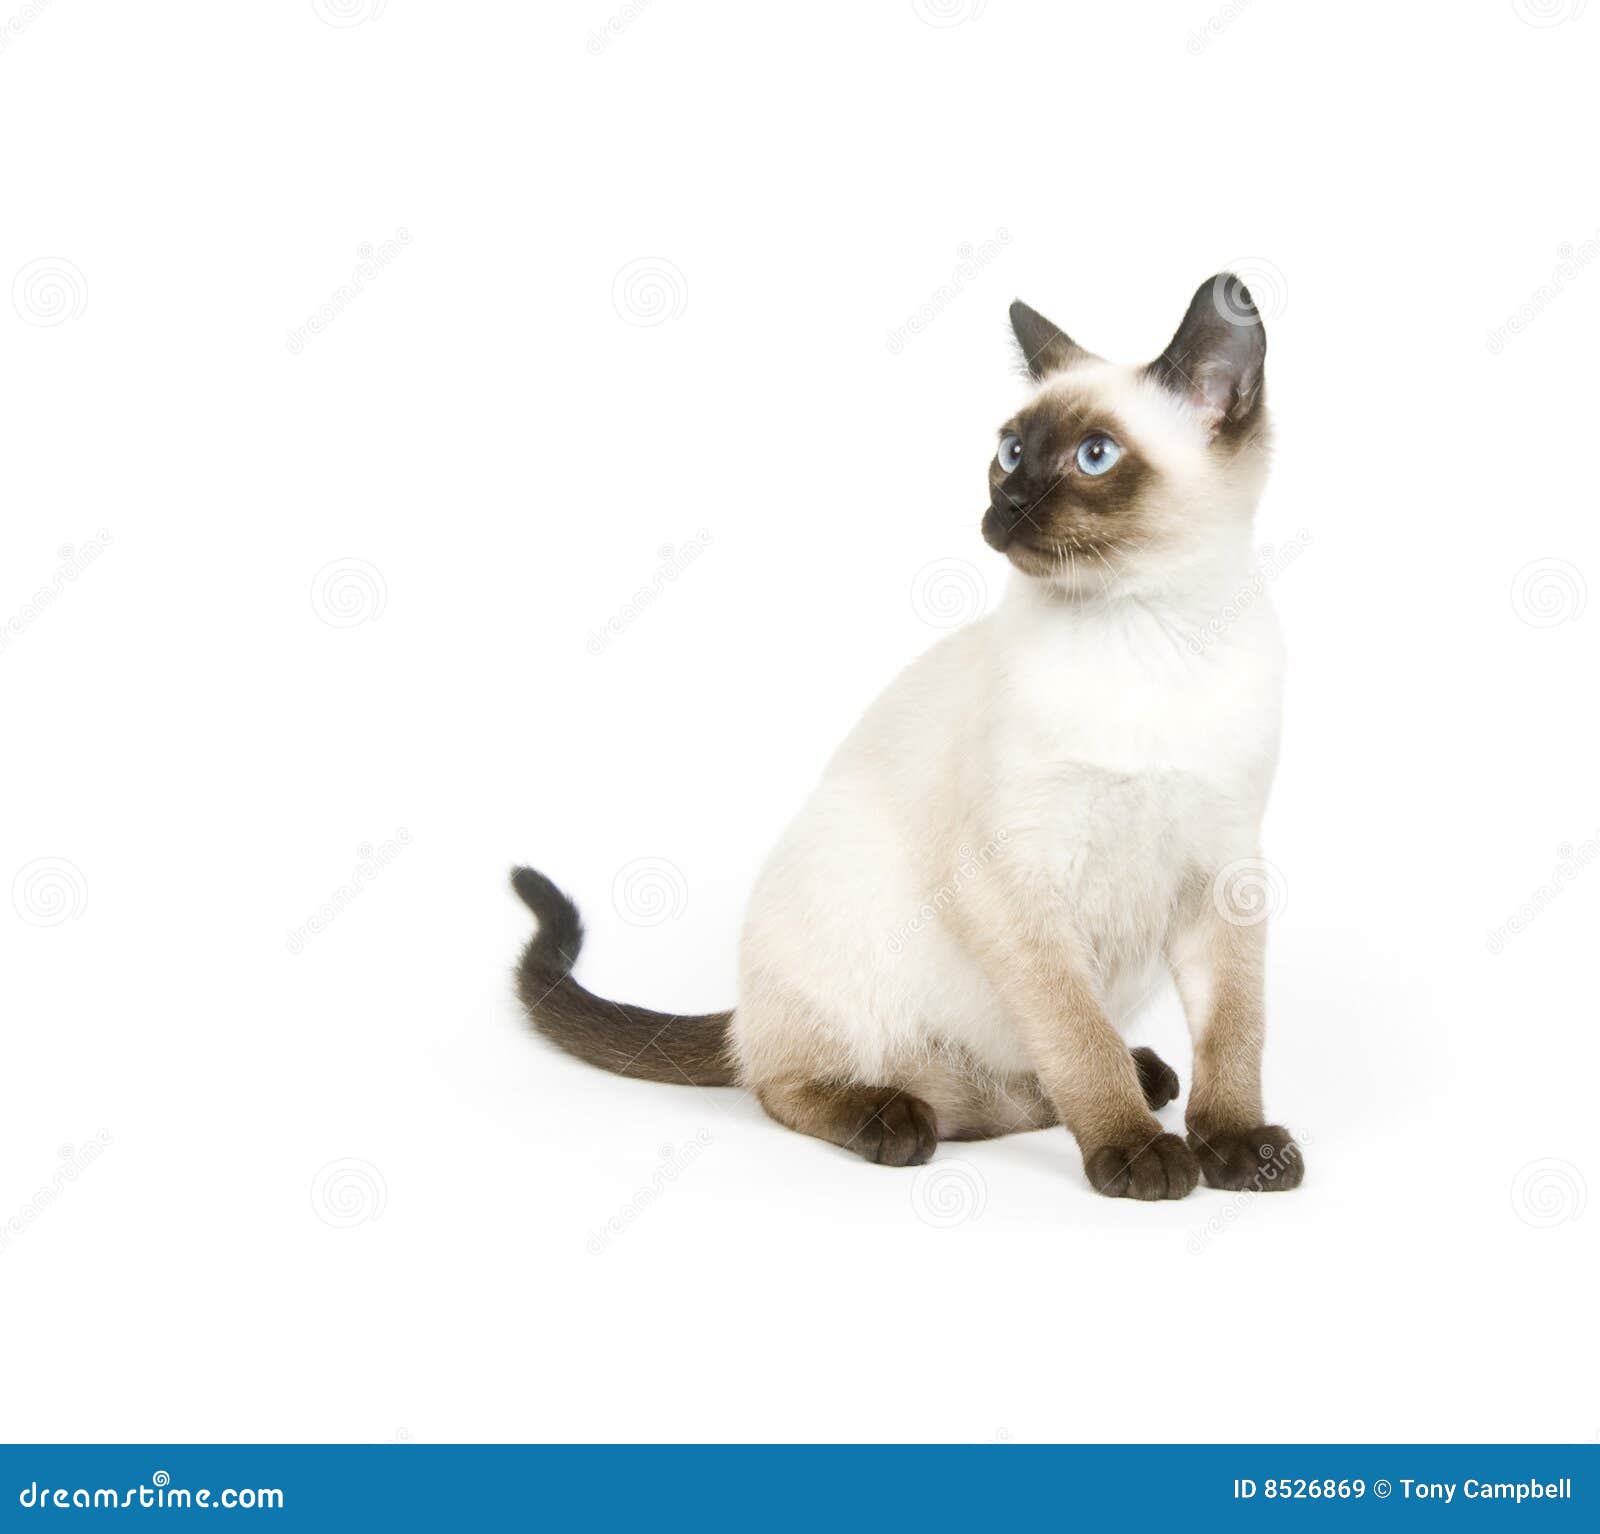 Siamese Kitten Sitting on a White Background Stock Image - Image of ...